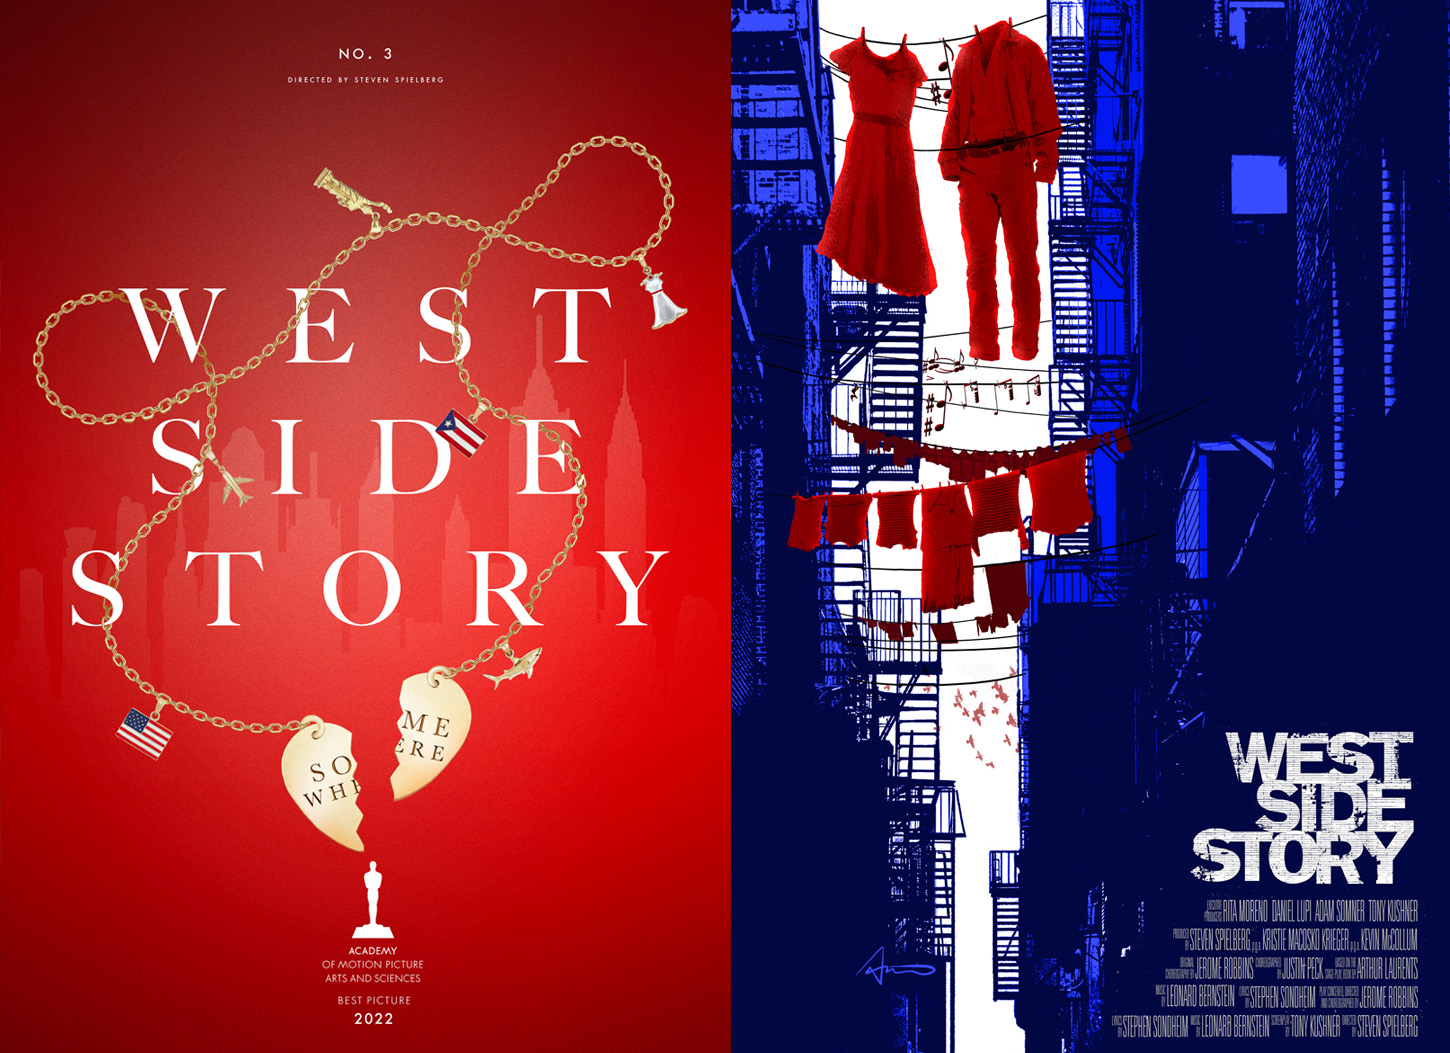 Interview: Haley Turnbull and Edgar Ascensão Reimagine the 2022 Academy Awards in Gorgeous Poster Series.